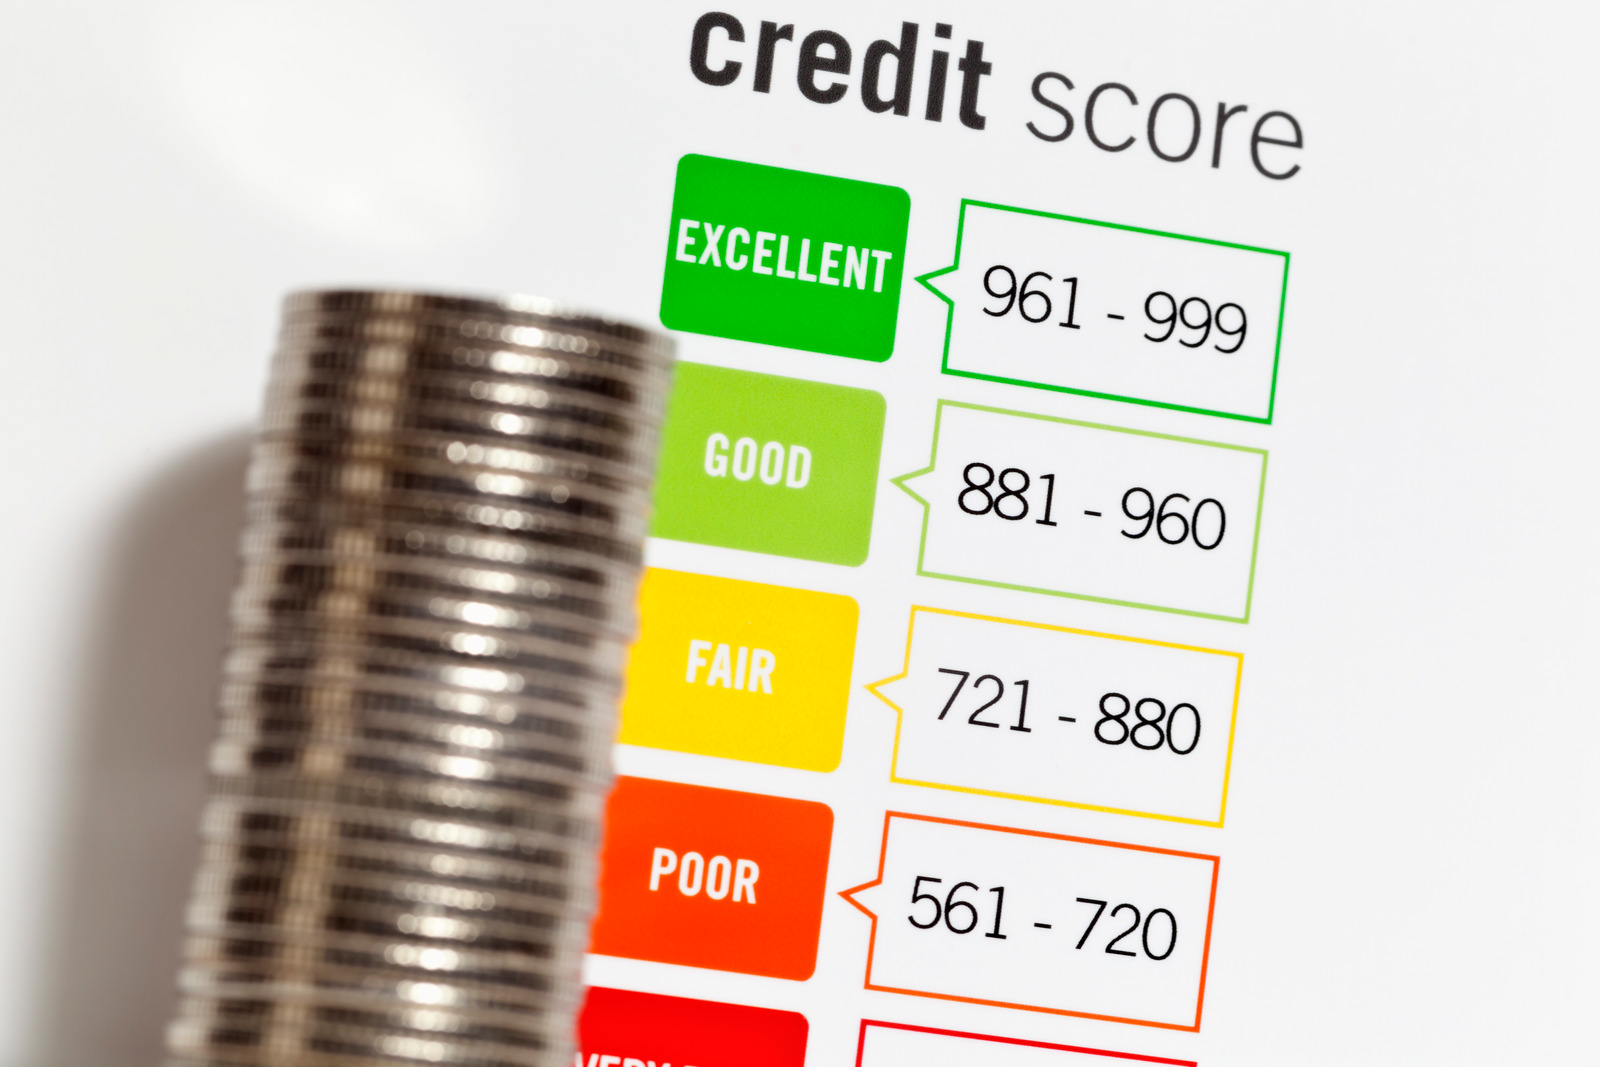 how do bad financial decisions affect my credit score?